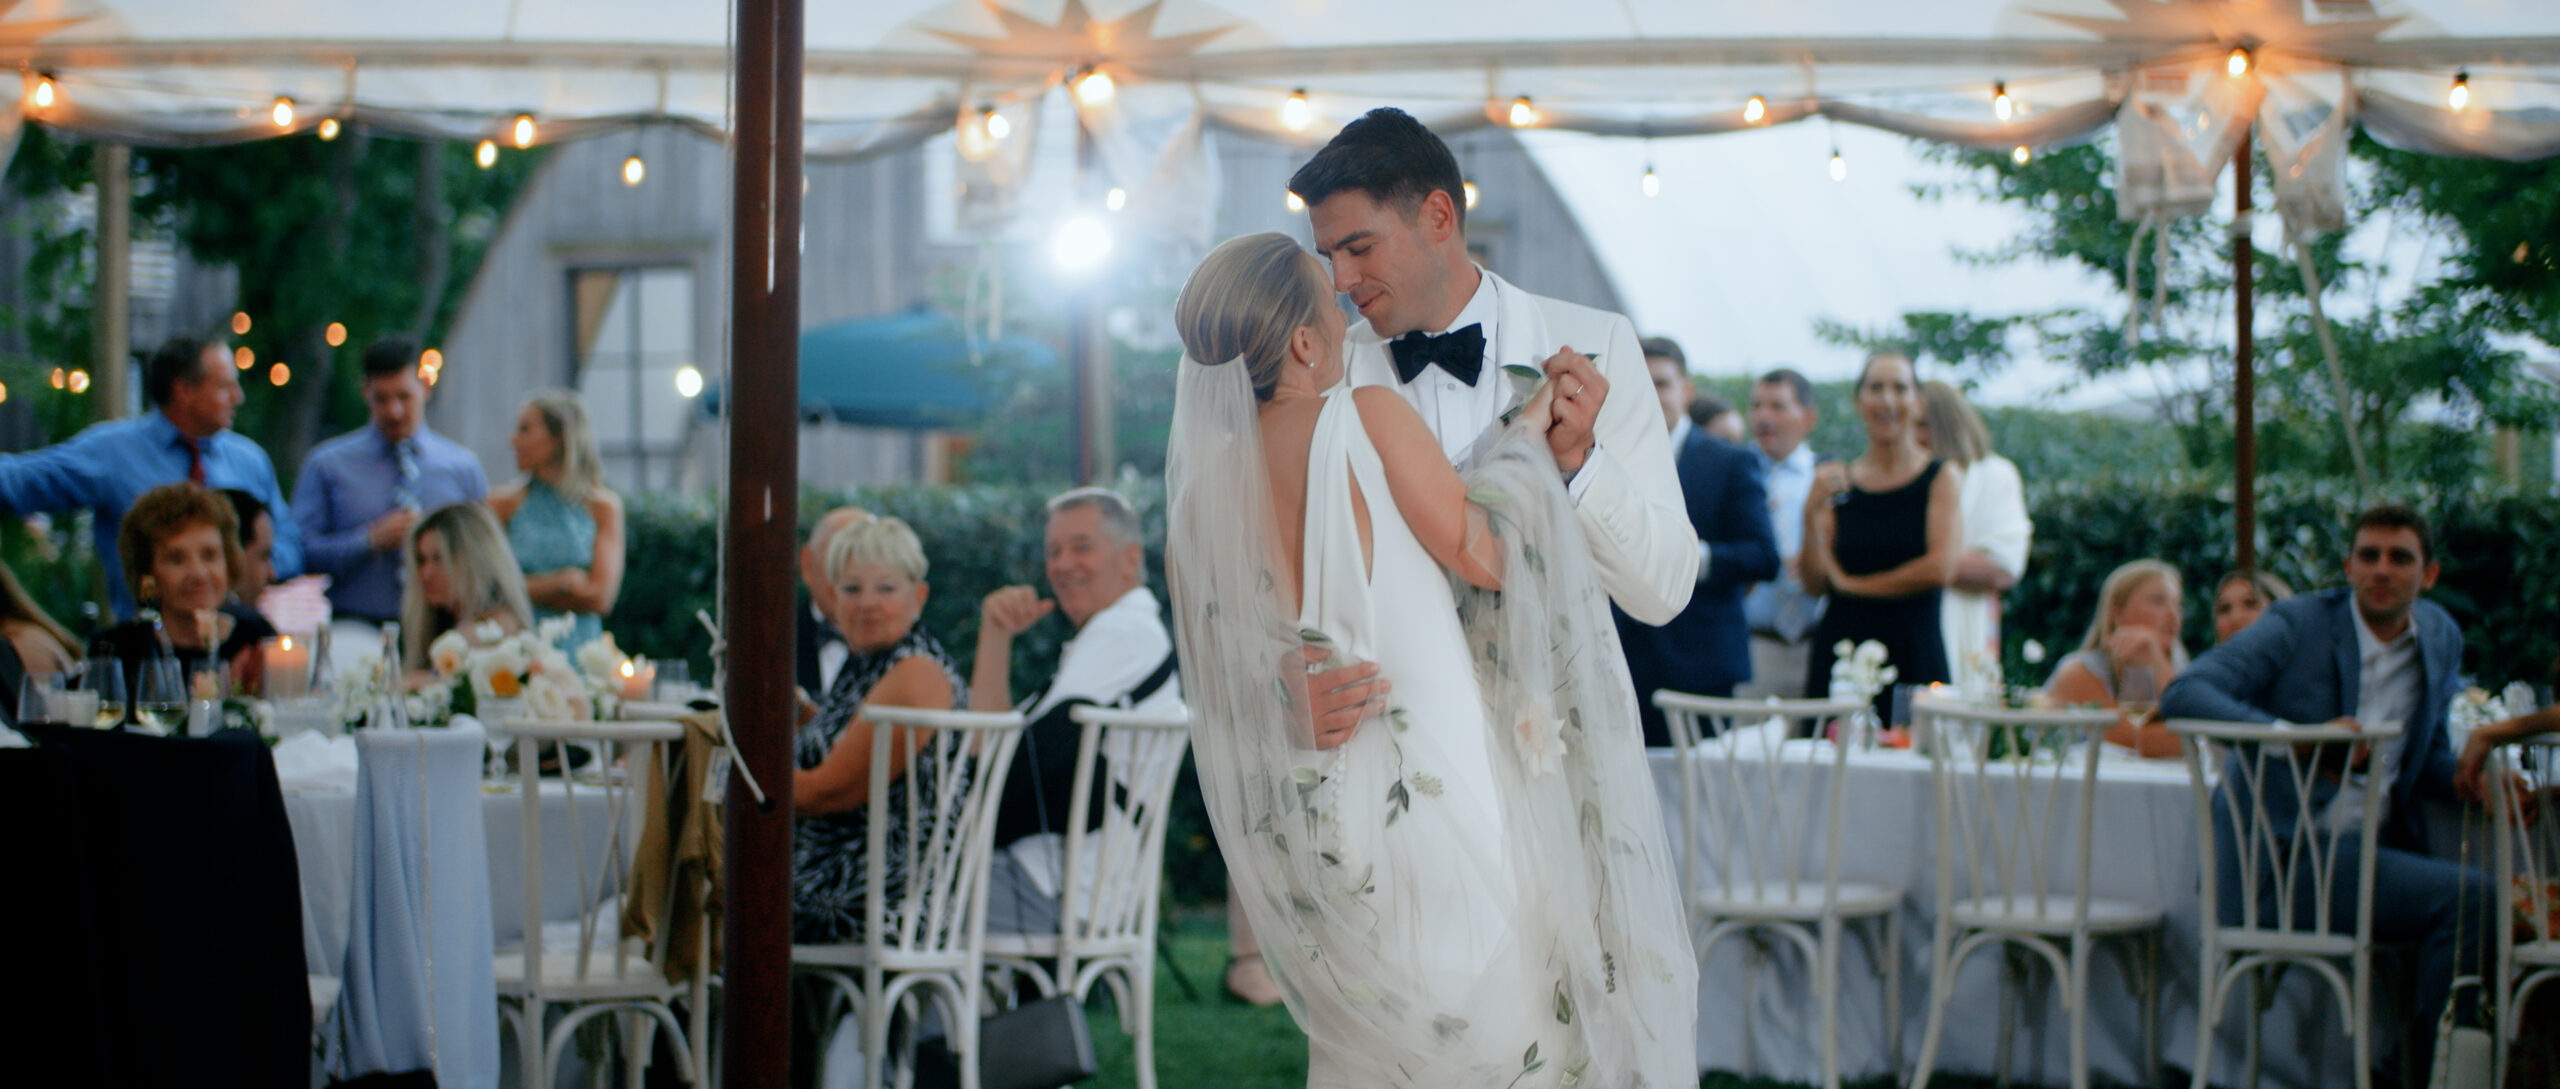 Why hiring a wedding planner helps your wedding video